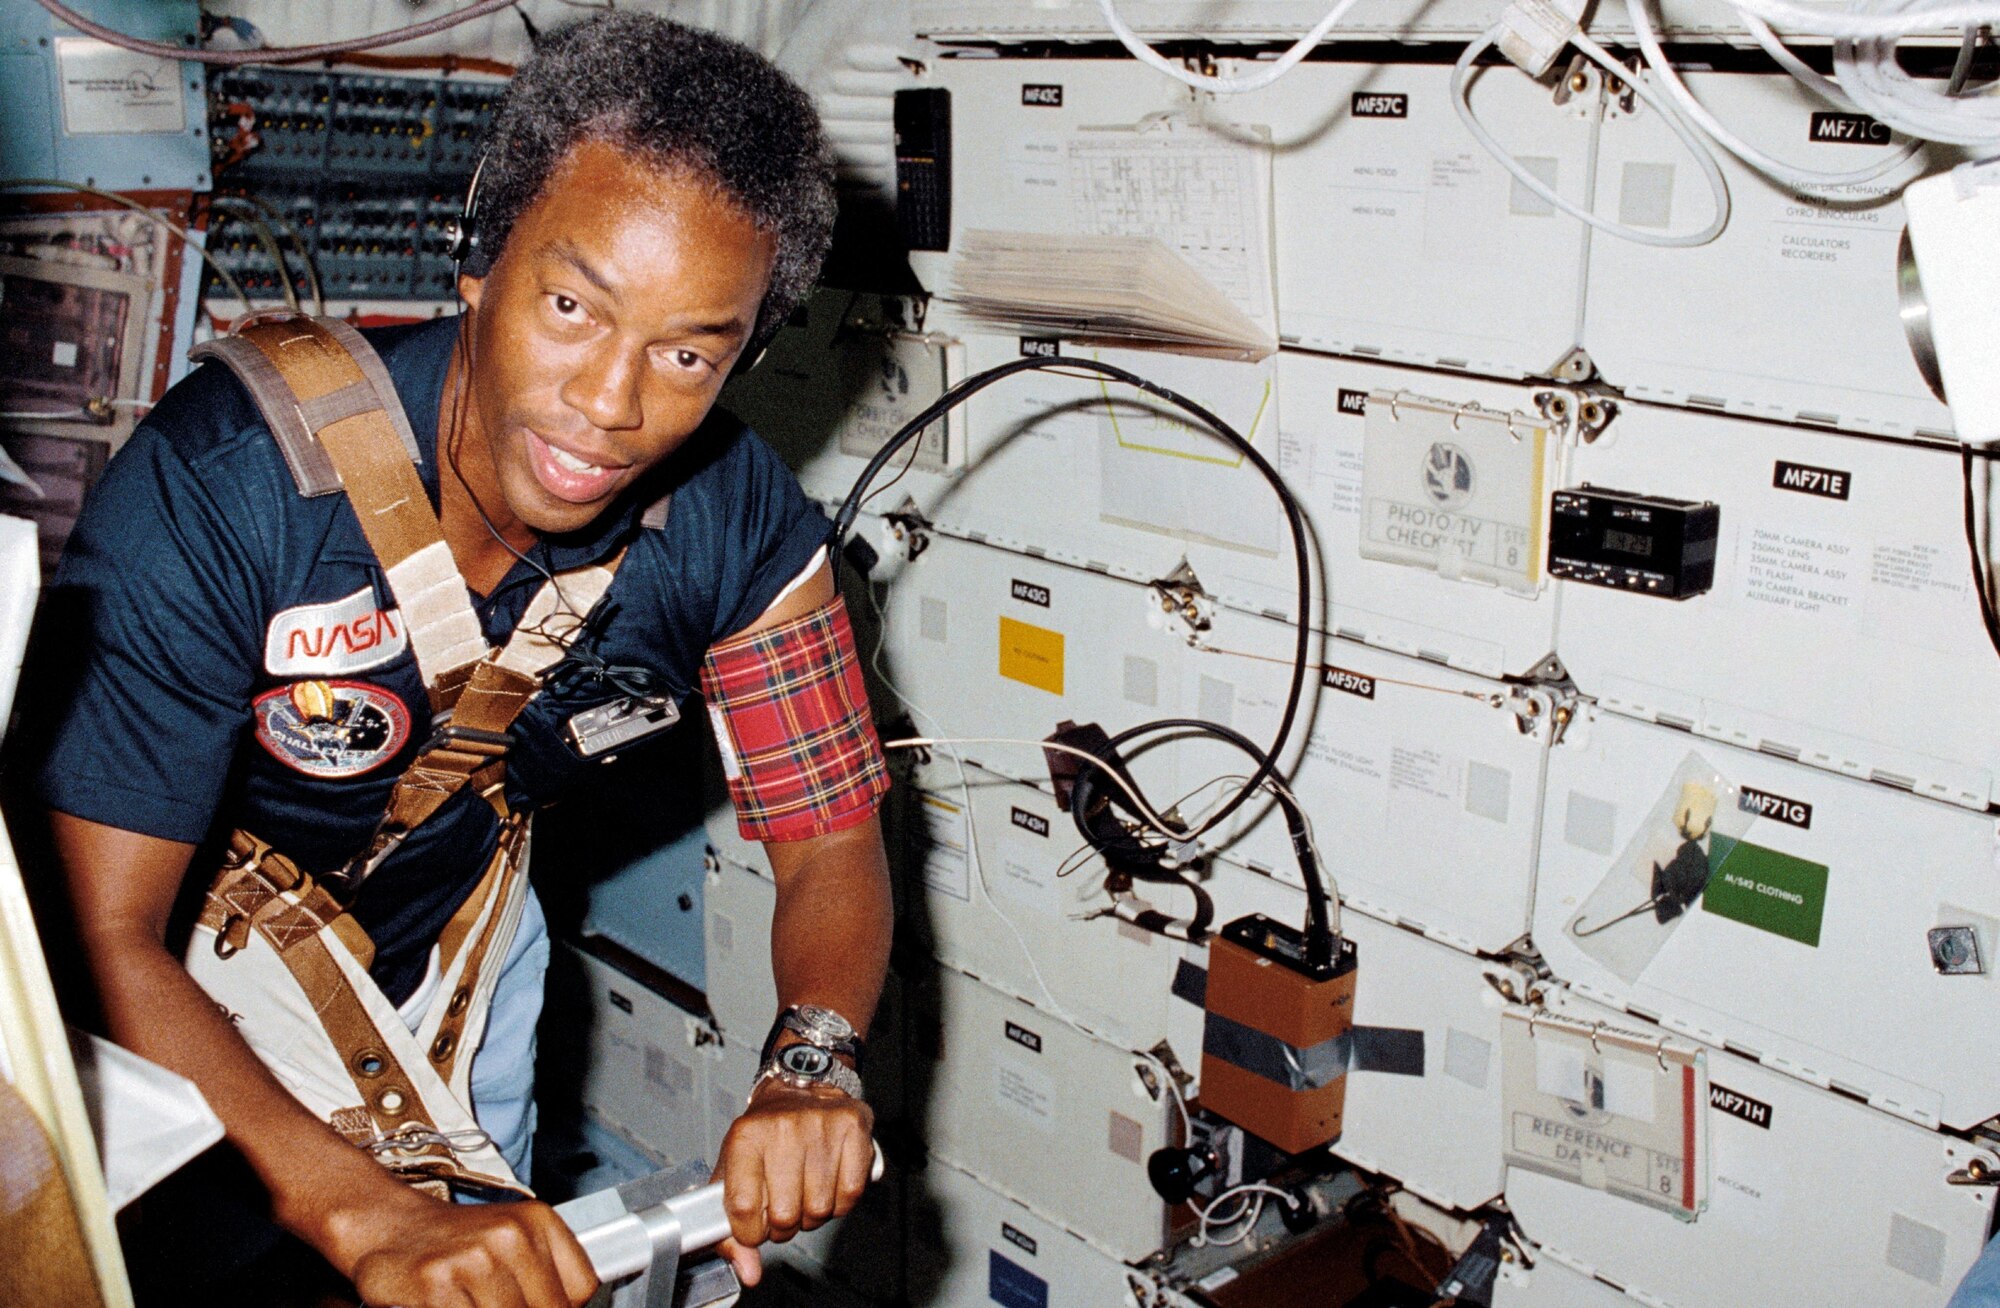 Astronaut Guion S. Bluford, STS-8 mission specialist, assists Dr. William E. Thornton (out of frame) with a medical test that requires use of the treadmill exercising device designed for spaceflight by the STS-8 medical doctor.